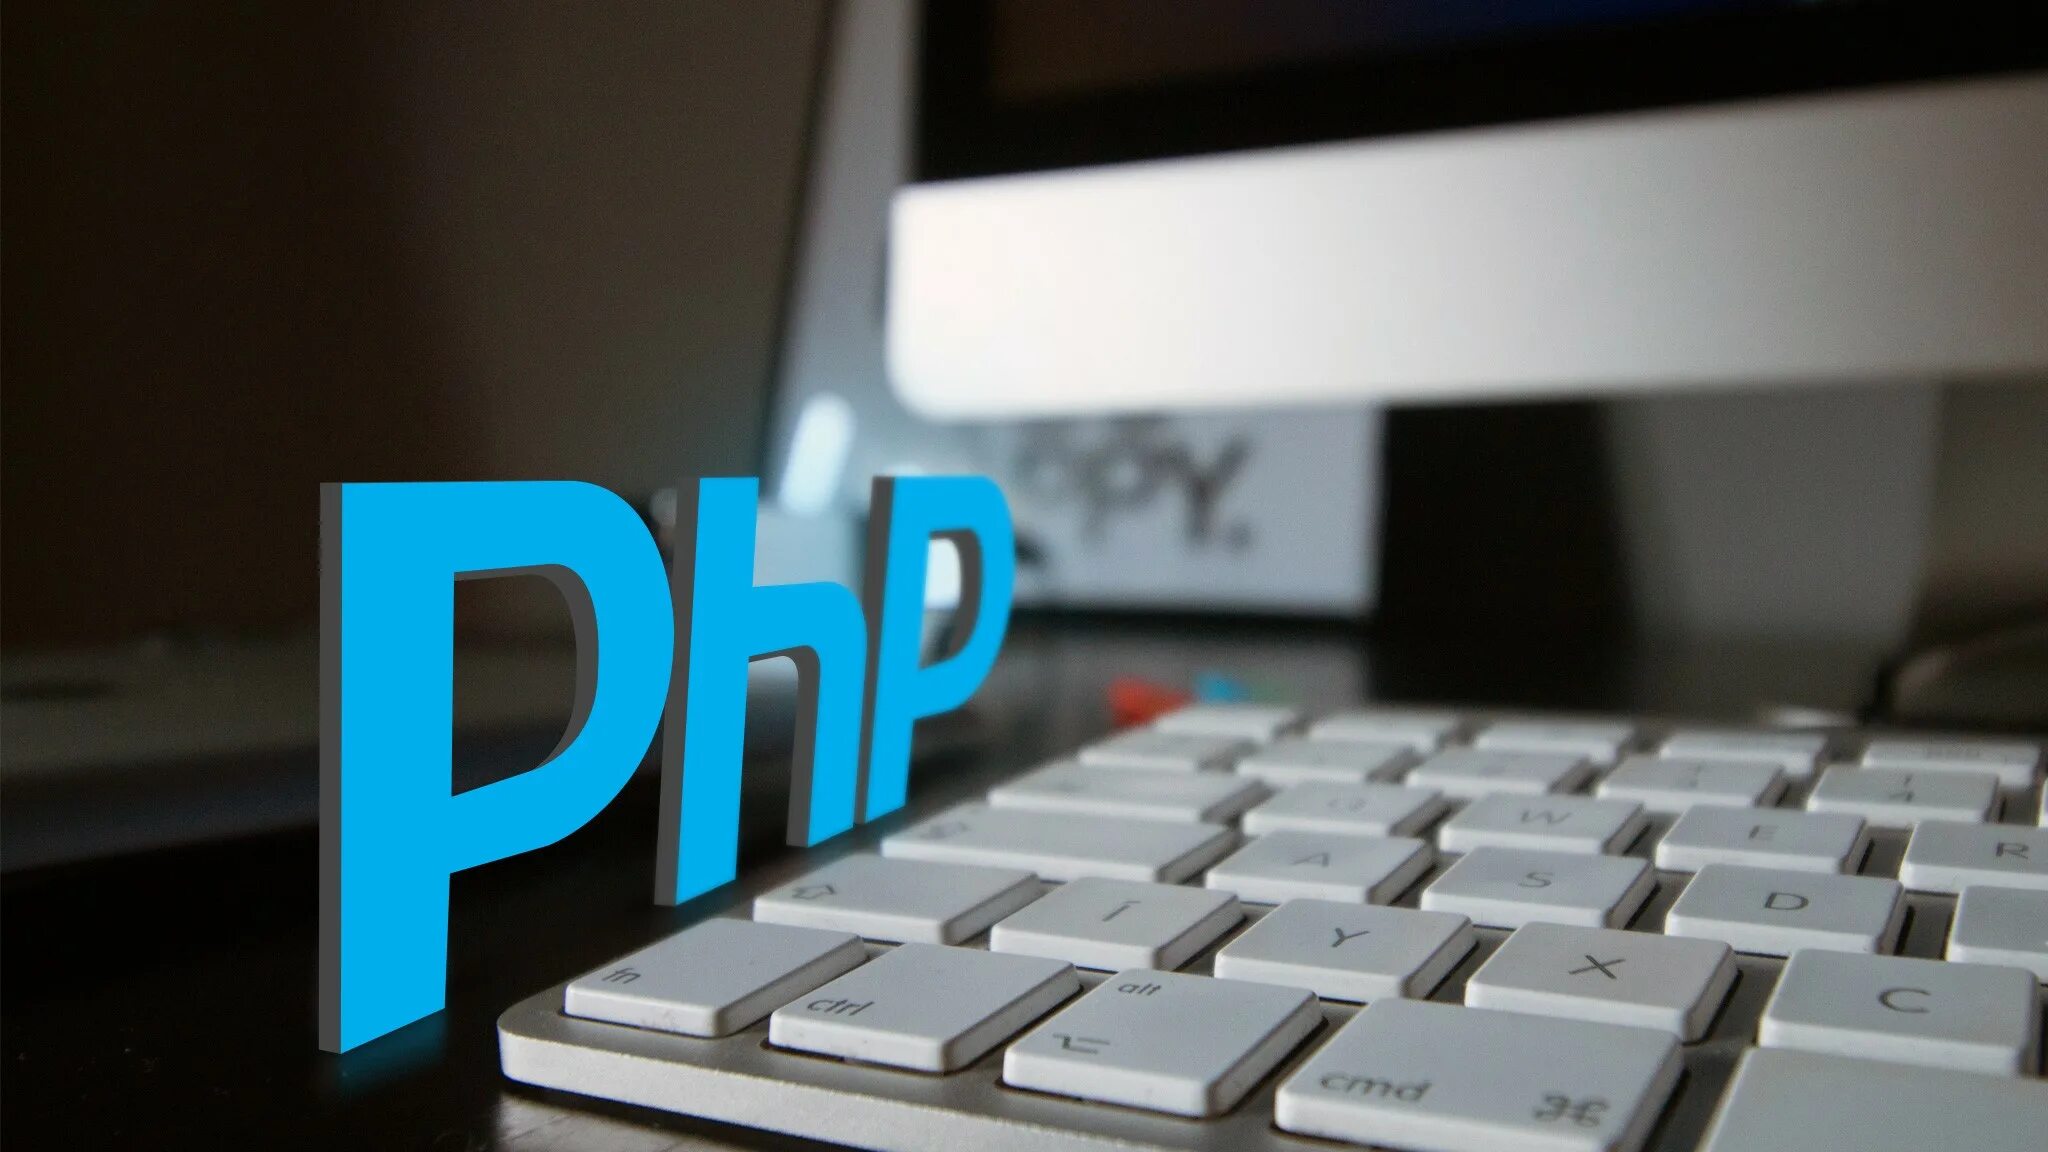 Php unique. Php обои. Php фото. Php заставка. Php разработка.